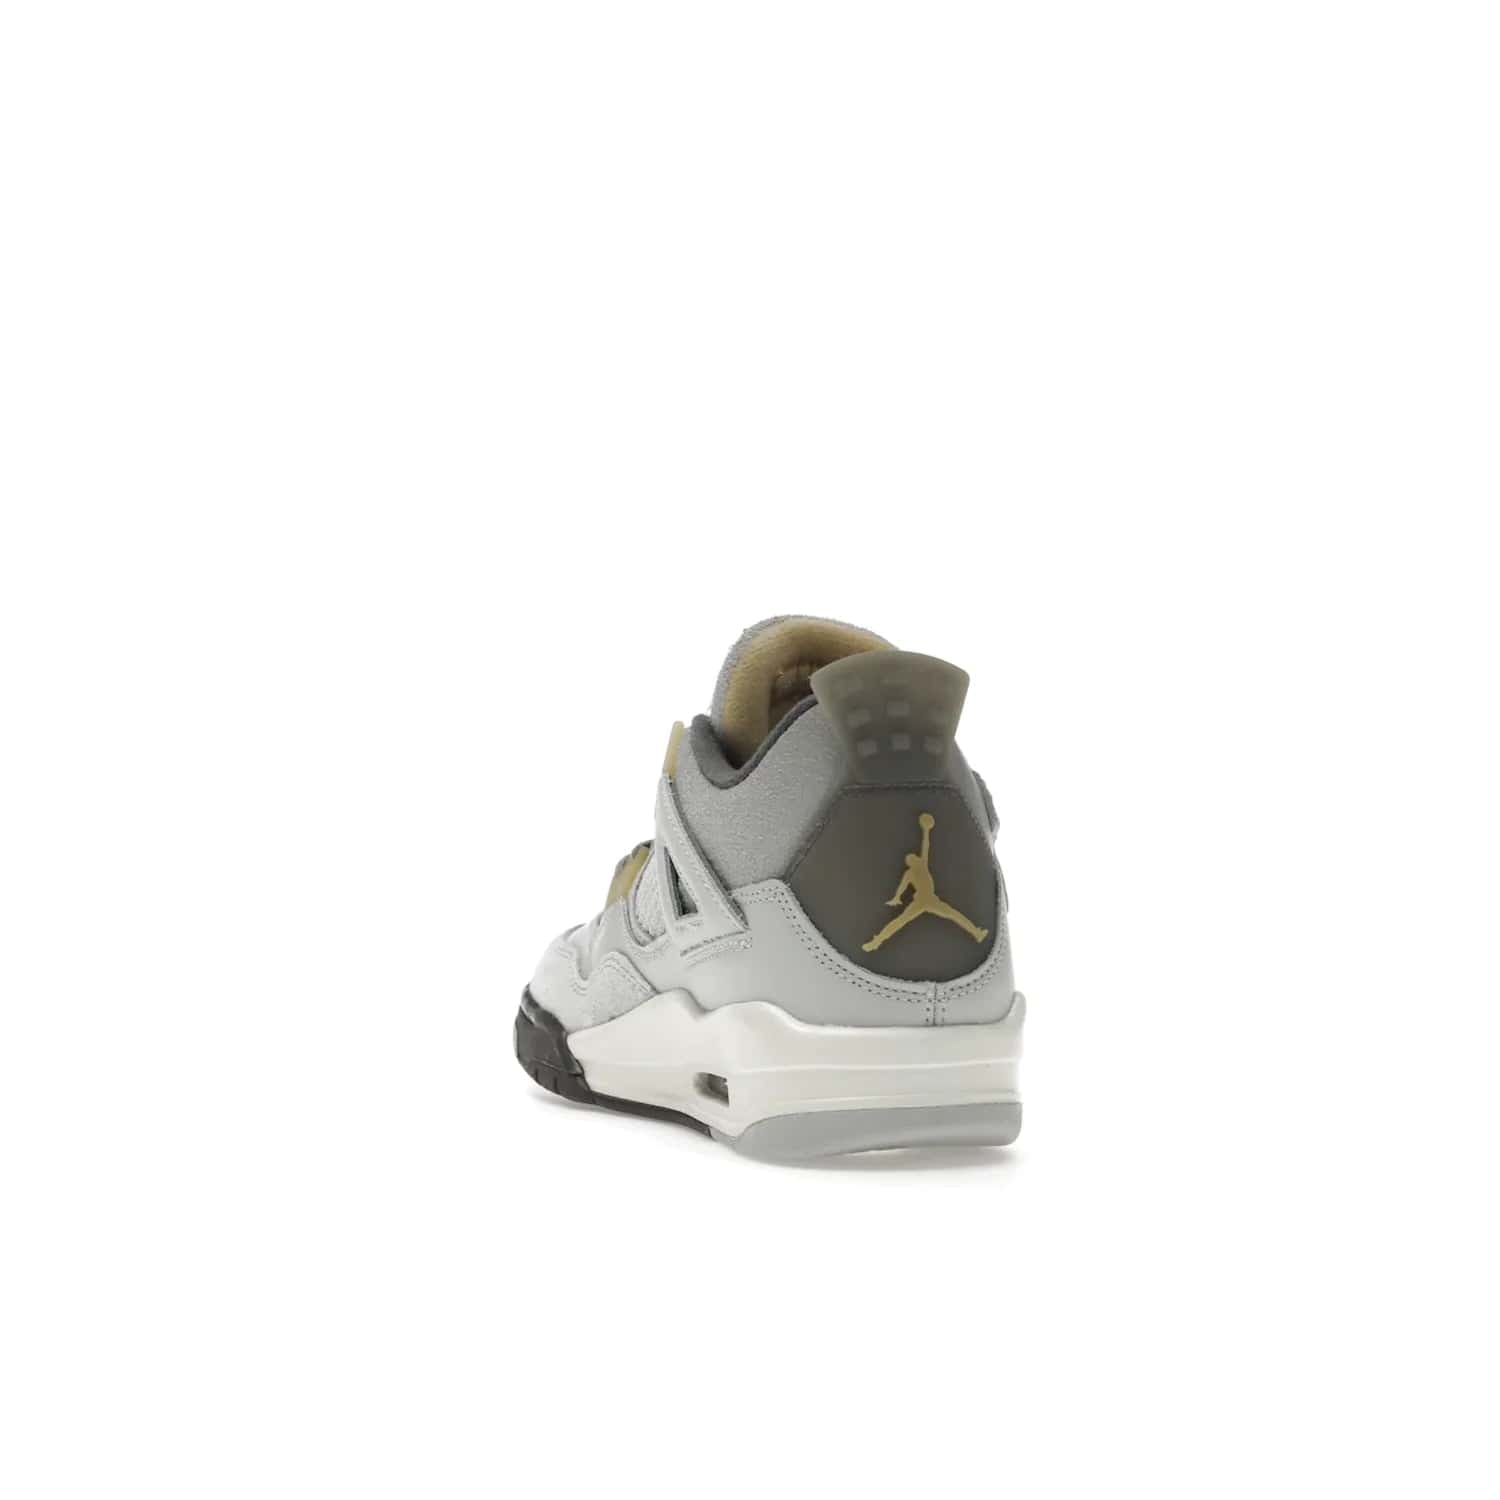 Jordan 4 Retro SE Craft Photon Dust (GS) - Image 26 - Only at www.BallersClubKickz.com - Shop the Jordan 4 Retro SE Craft Photon Dust (GS), the ultimate mix of style and comfort. With photonic dust, pale vanilla, off-white, grey fog, flat pewter and sail colorway, foam midsole, and rubber outsole, don't miss this special edition Jordan 4 releasing Feb 11, 2023.